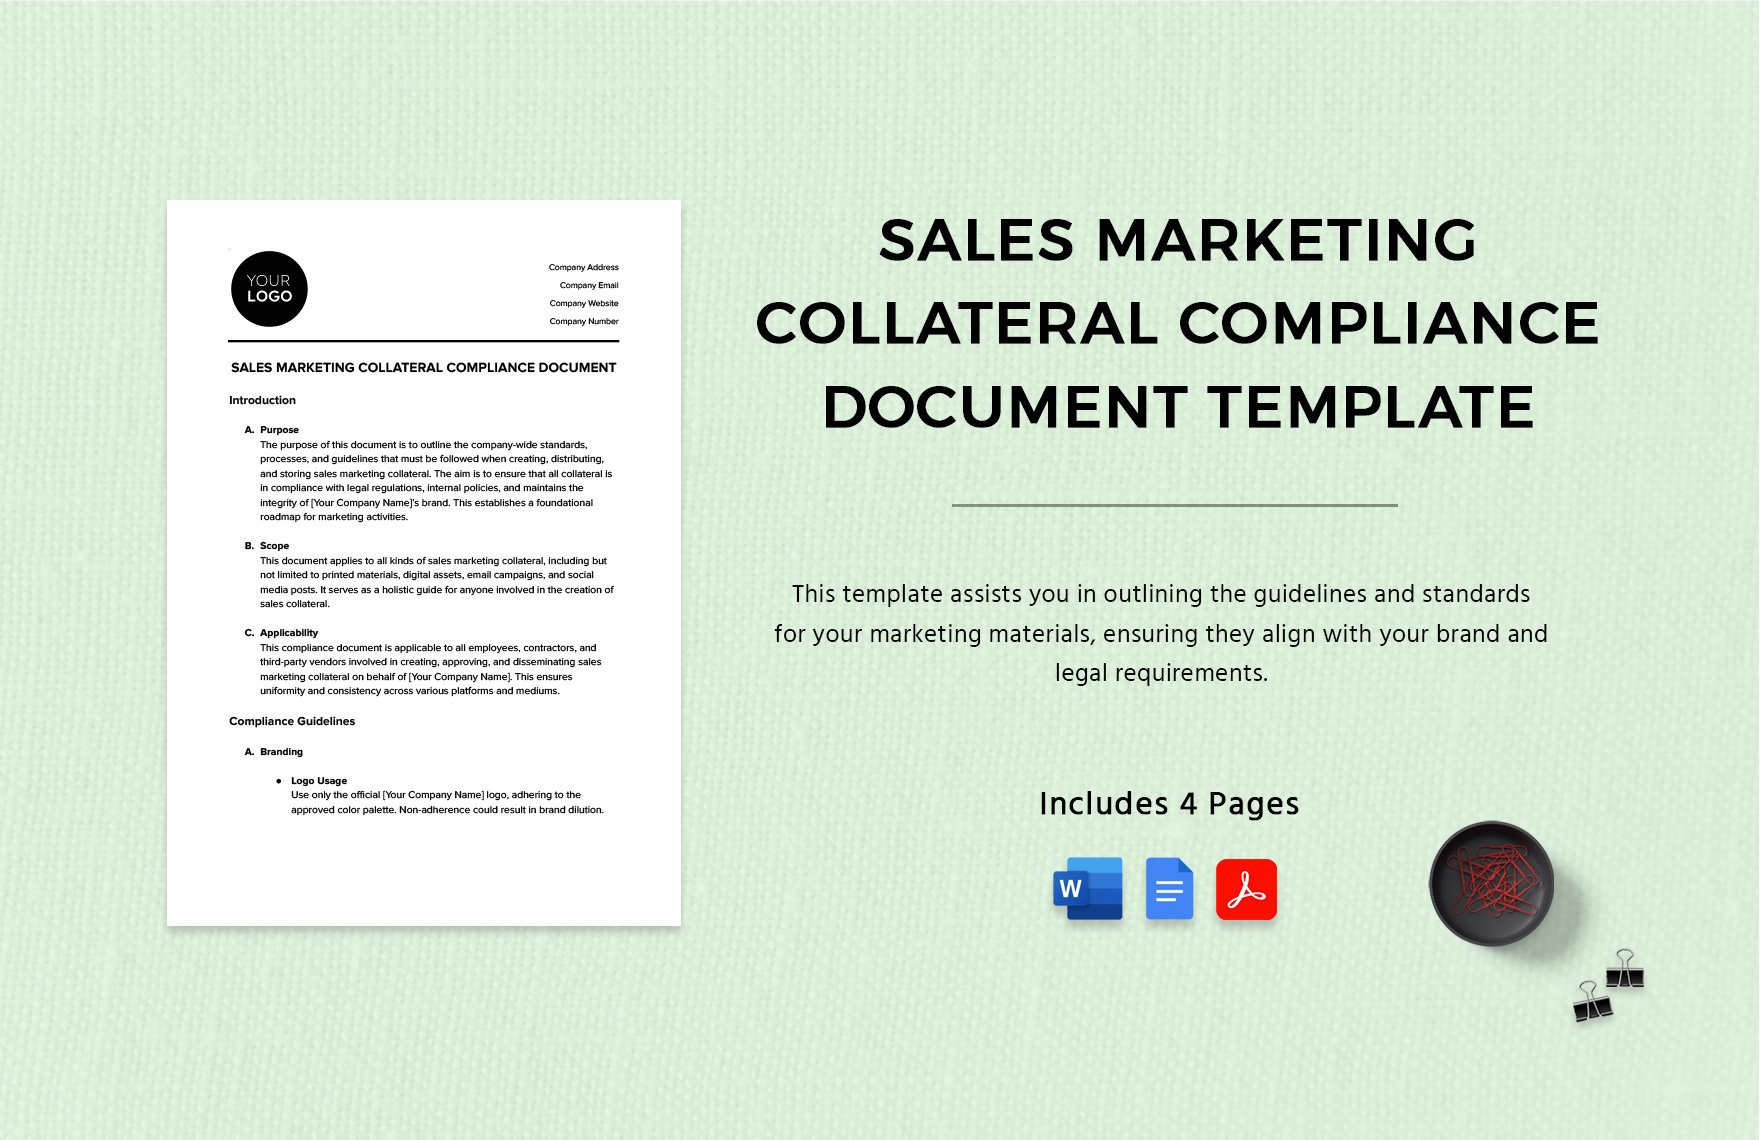 Sales Marketing Collateral Compliance Document Template in Word, Google Docs, PDF